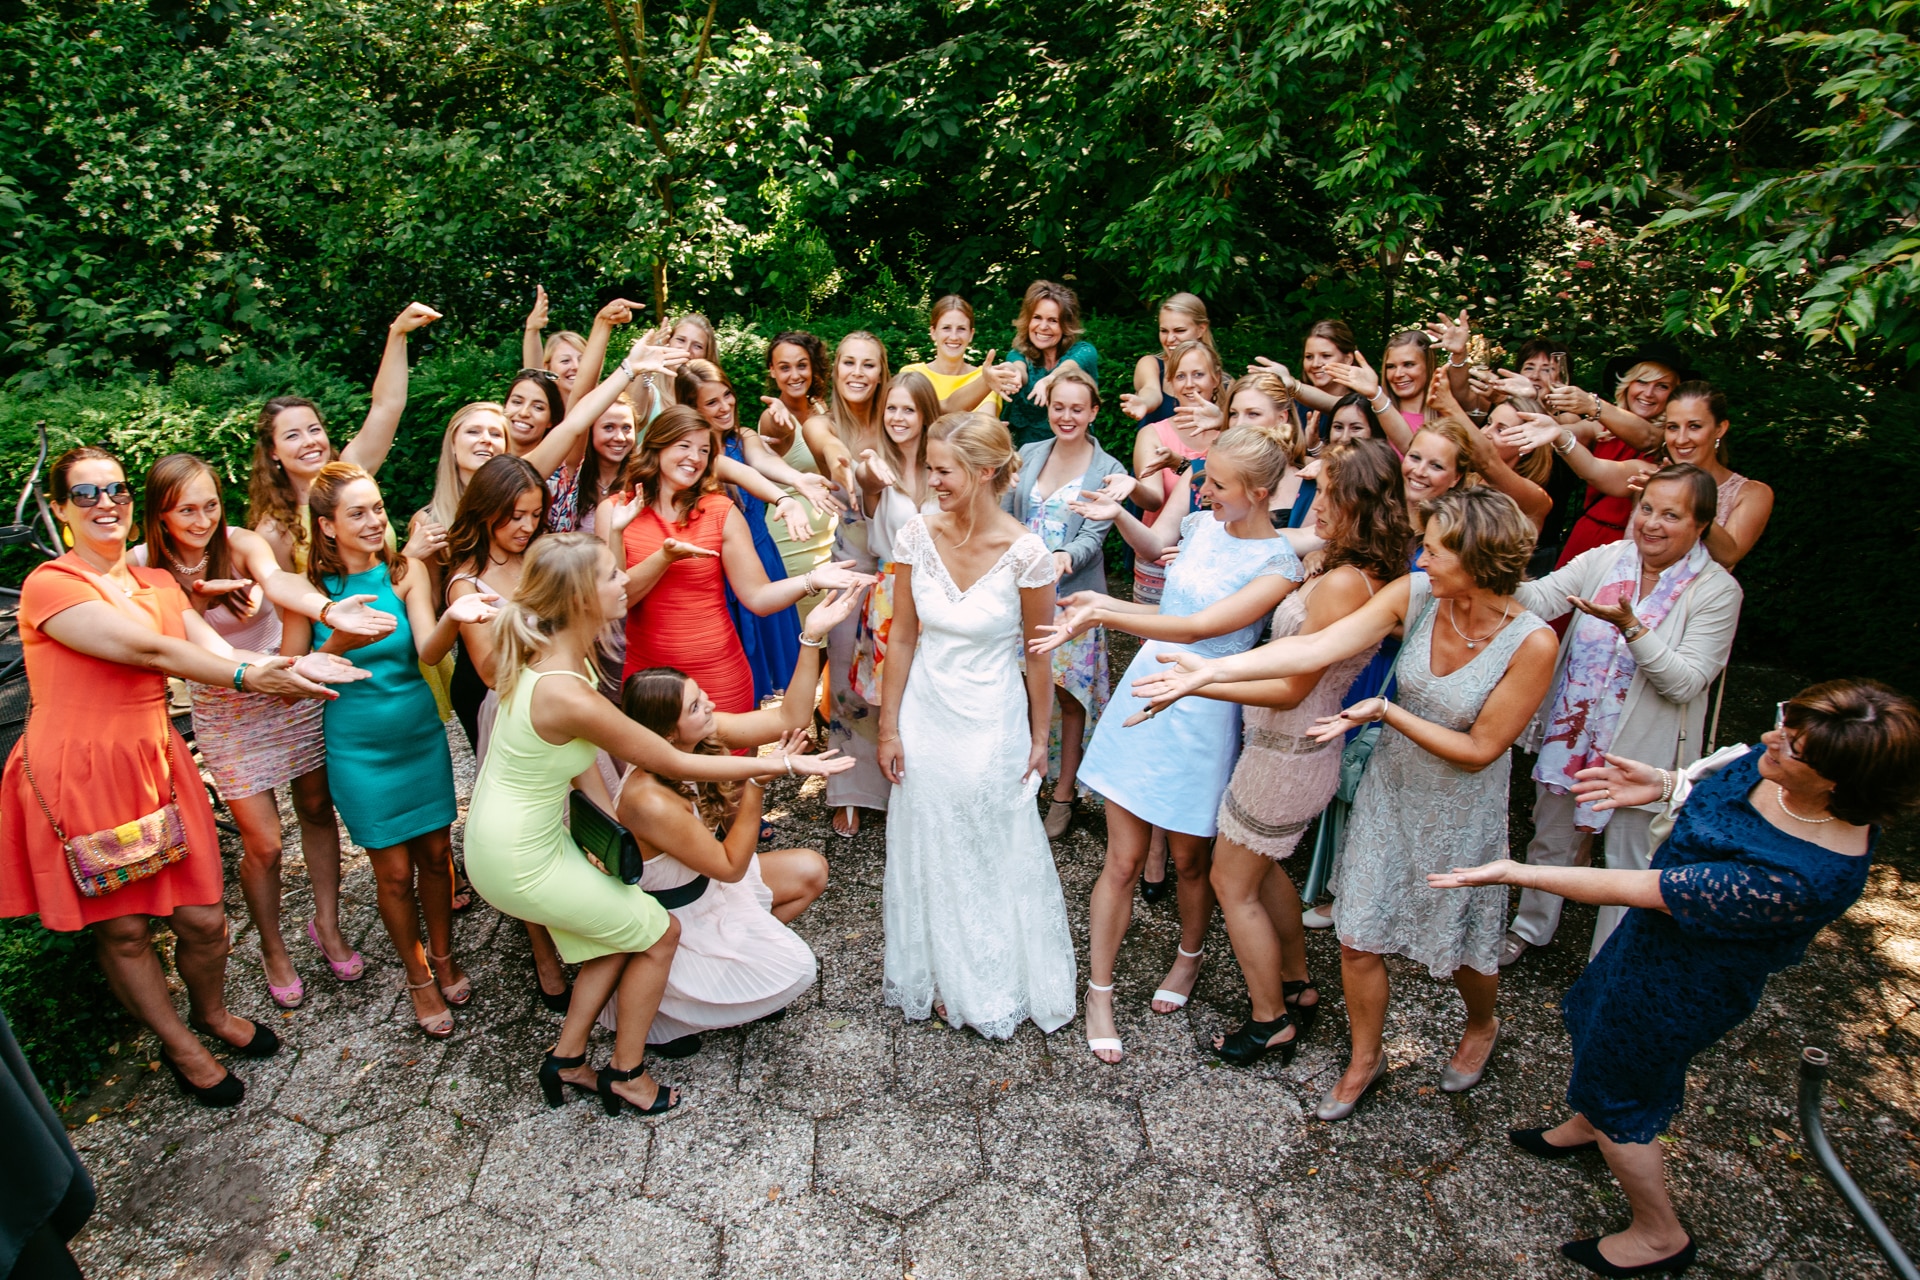 A group of bridesmaids getting married in the forest pose for a photo.